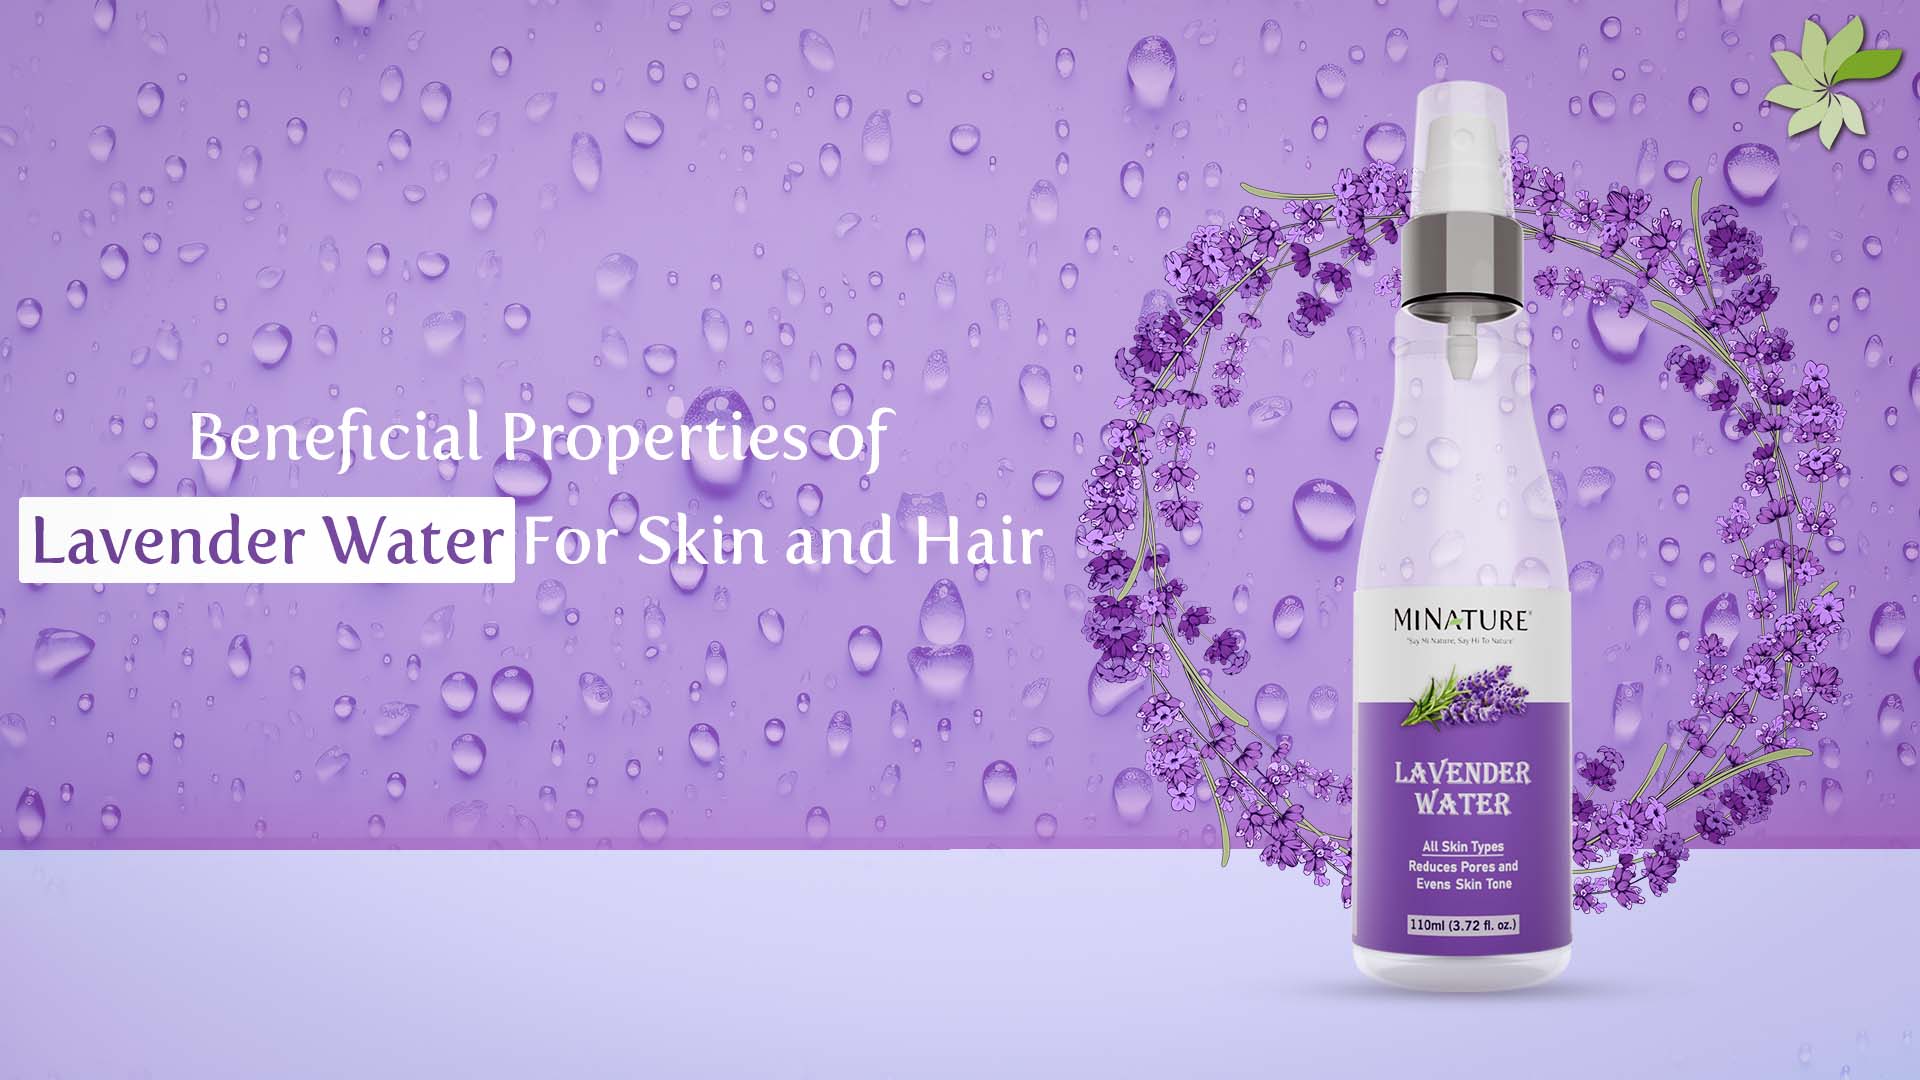 MINATURE Lavender Water: Natural skincare and haircare with the soothing power of lavender flower.